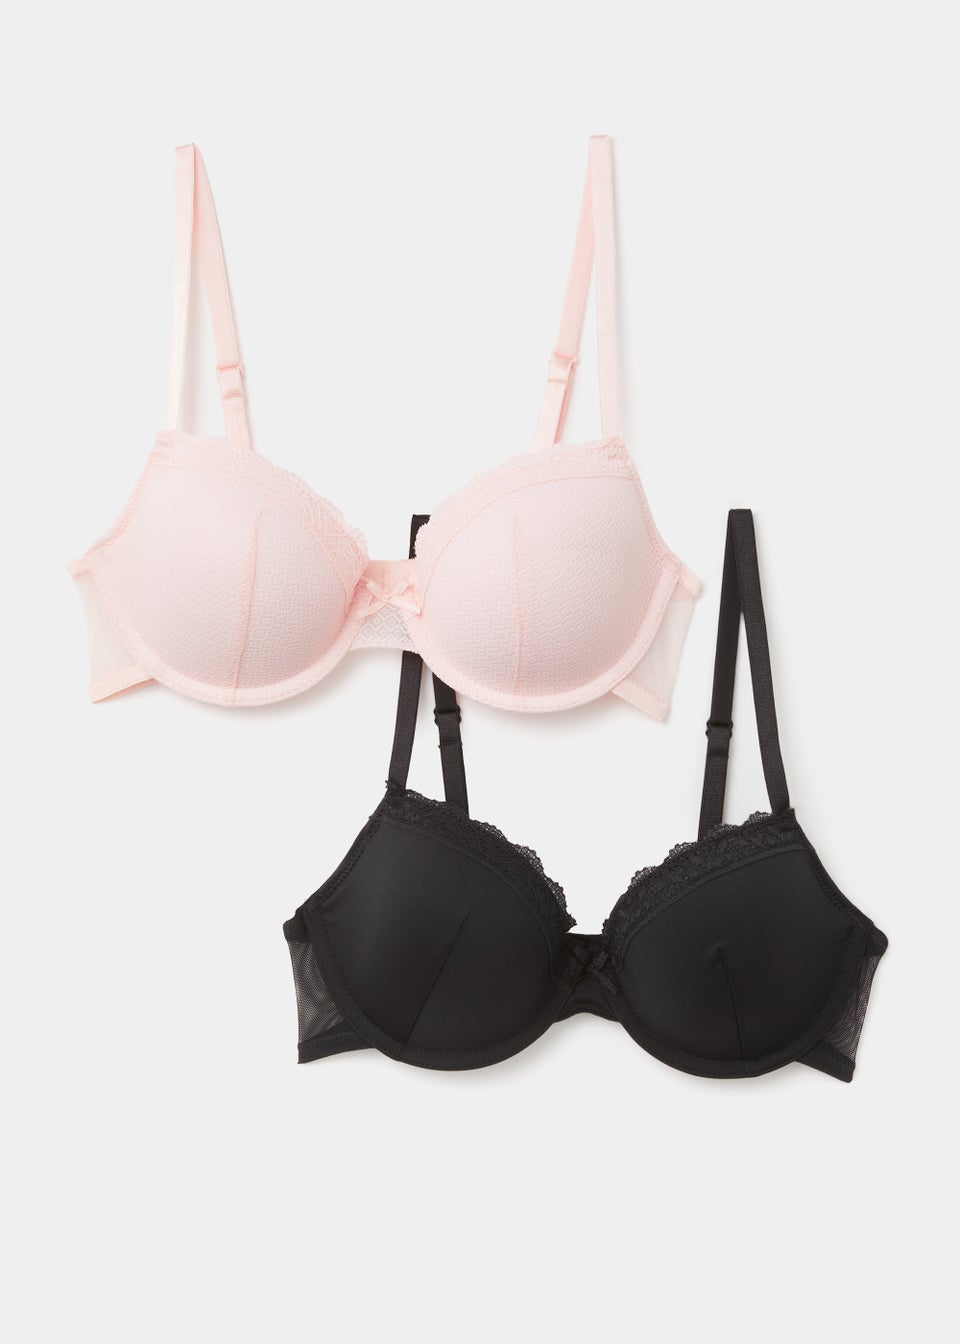 Matalan - We have this lovely set in coral: Alicia 3D longline bra